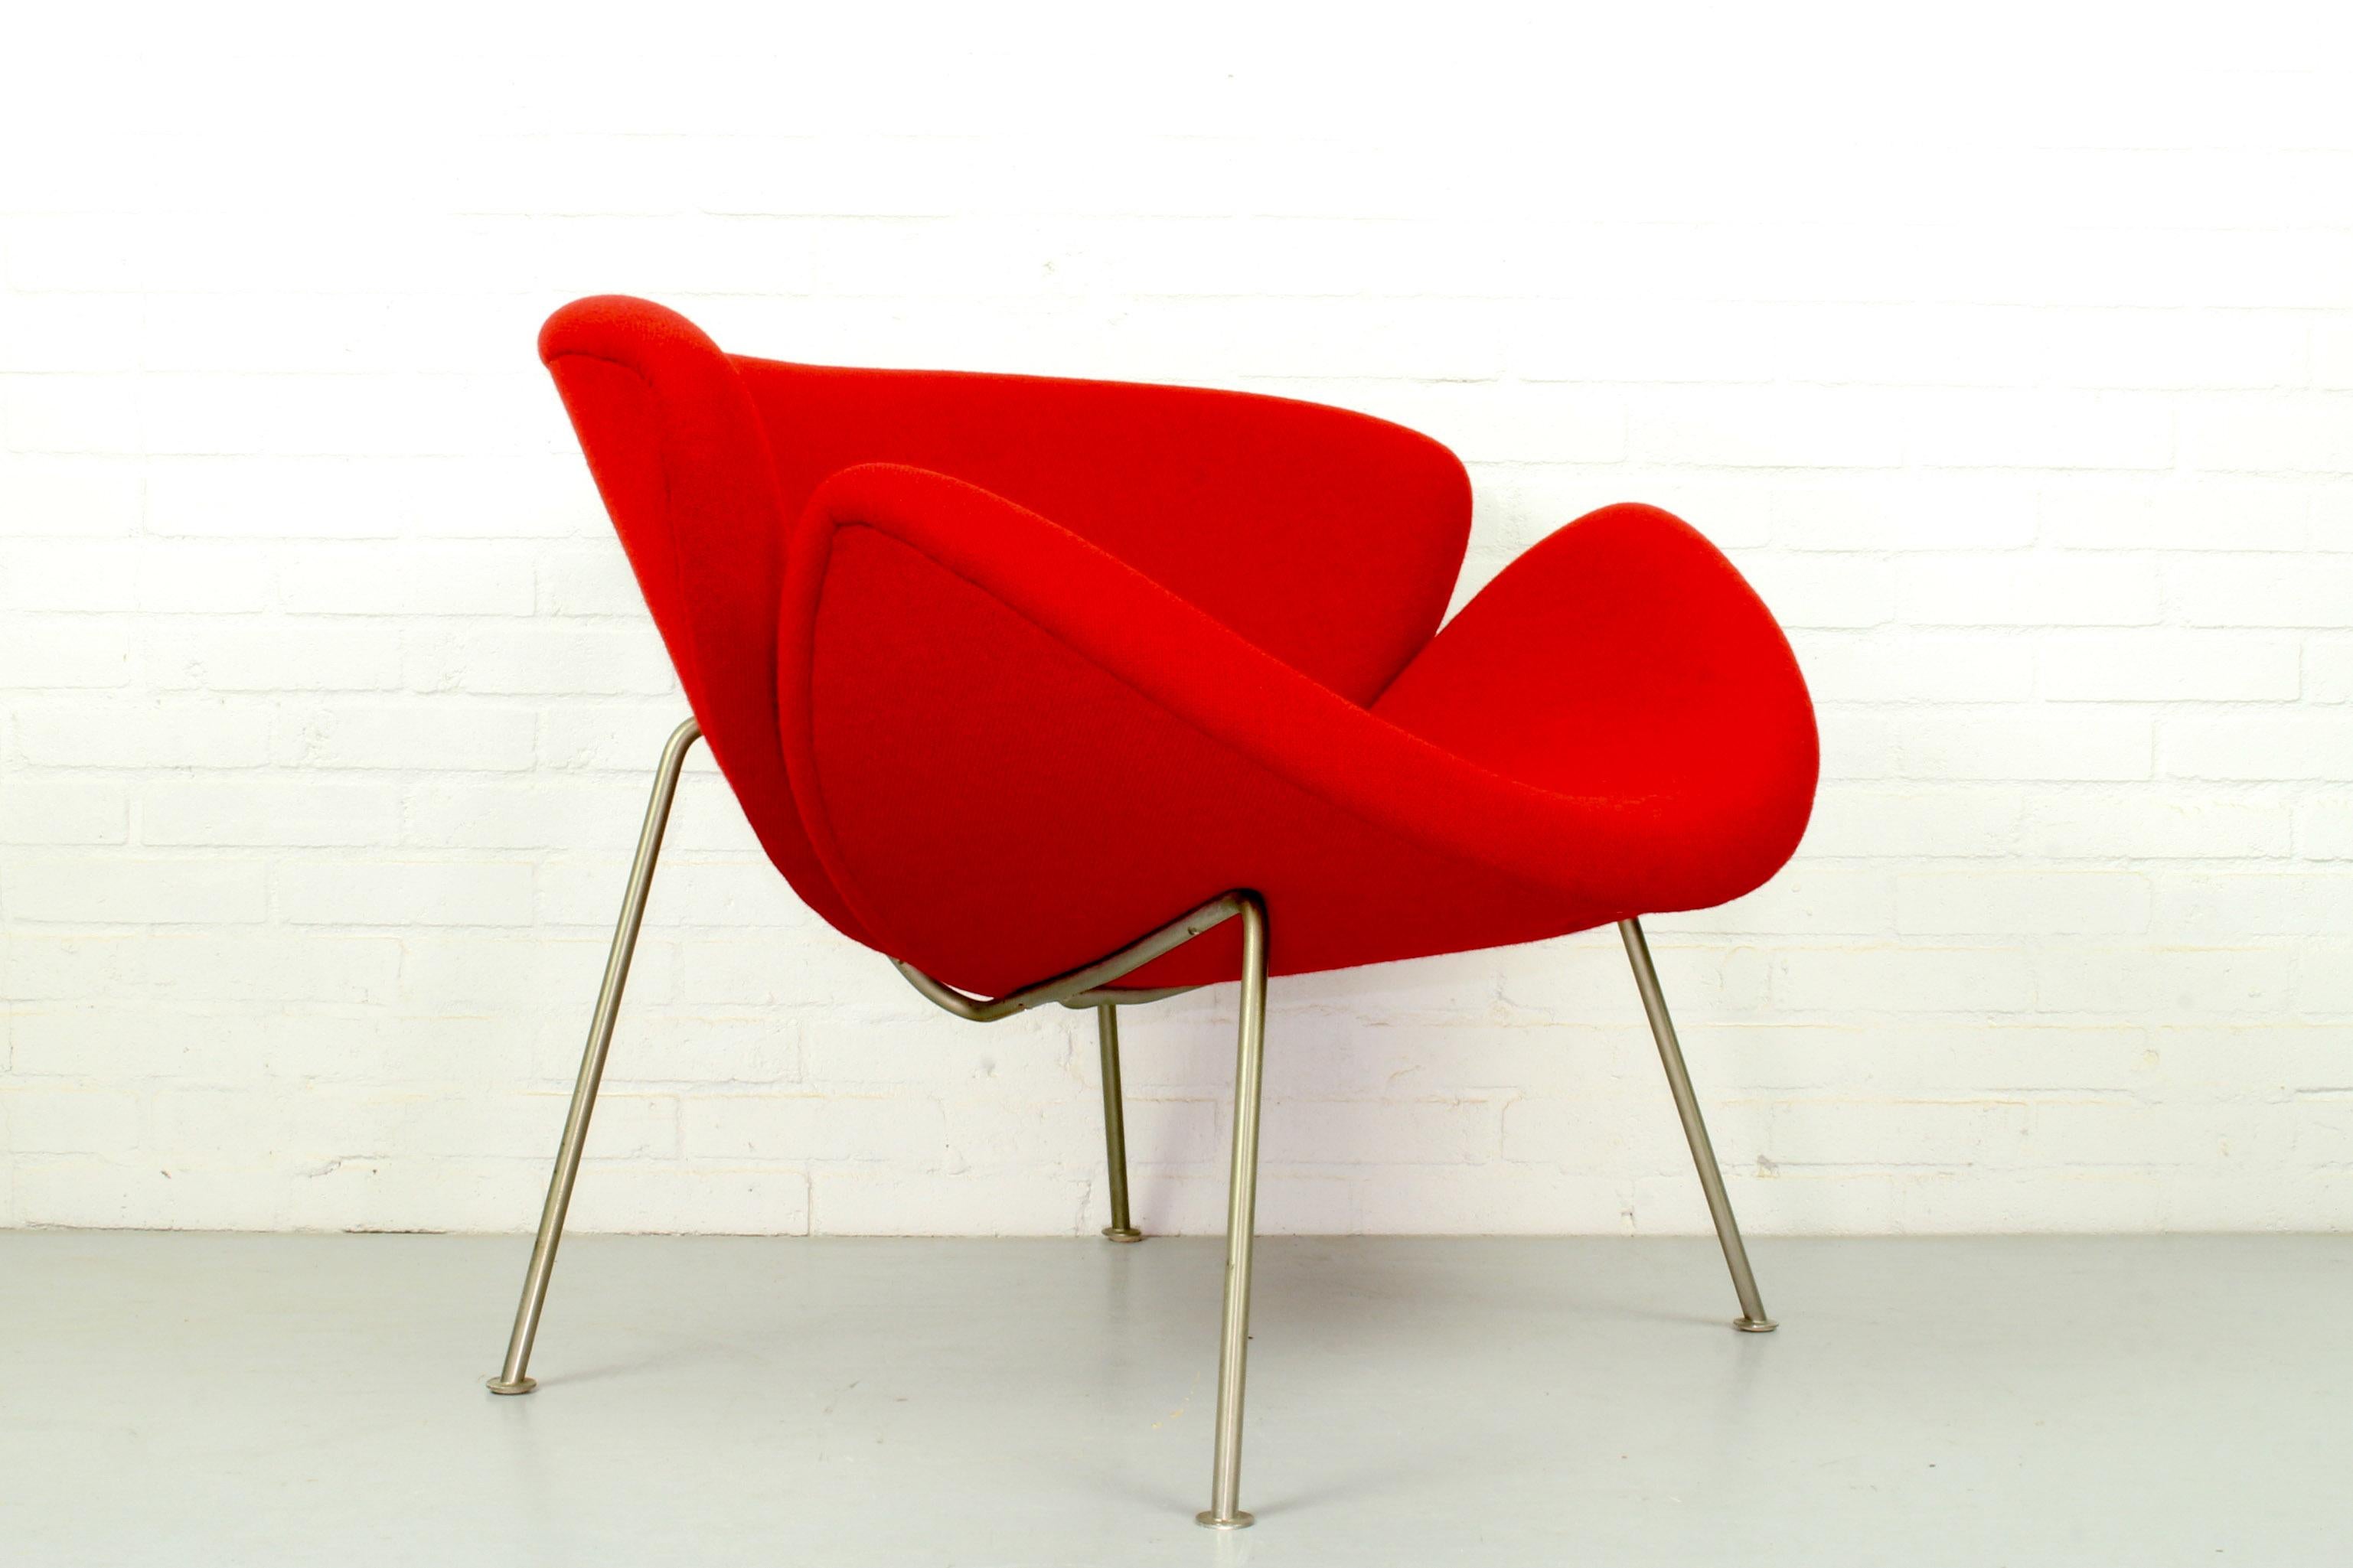 The famous orange slice chair by Pierre Paulin was designed in the 1960s. The fabric and the foam are in very good vintage condition, the chair is upholstered in a beautiful red color.